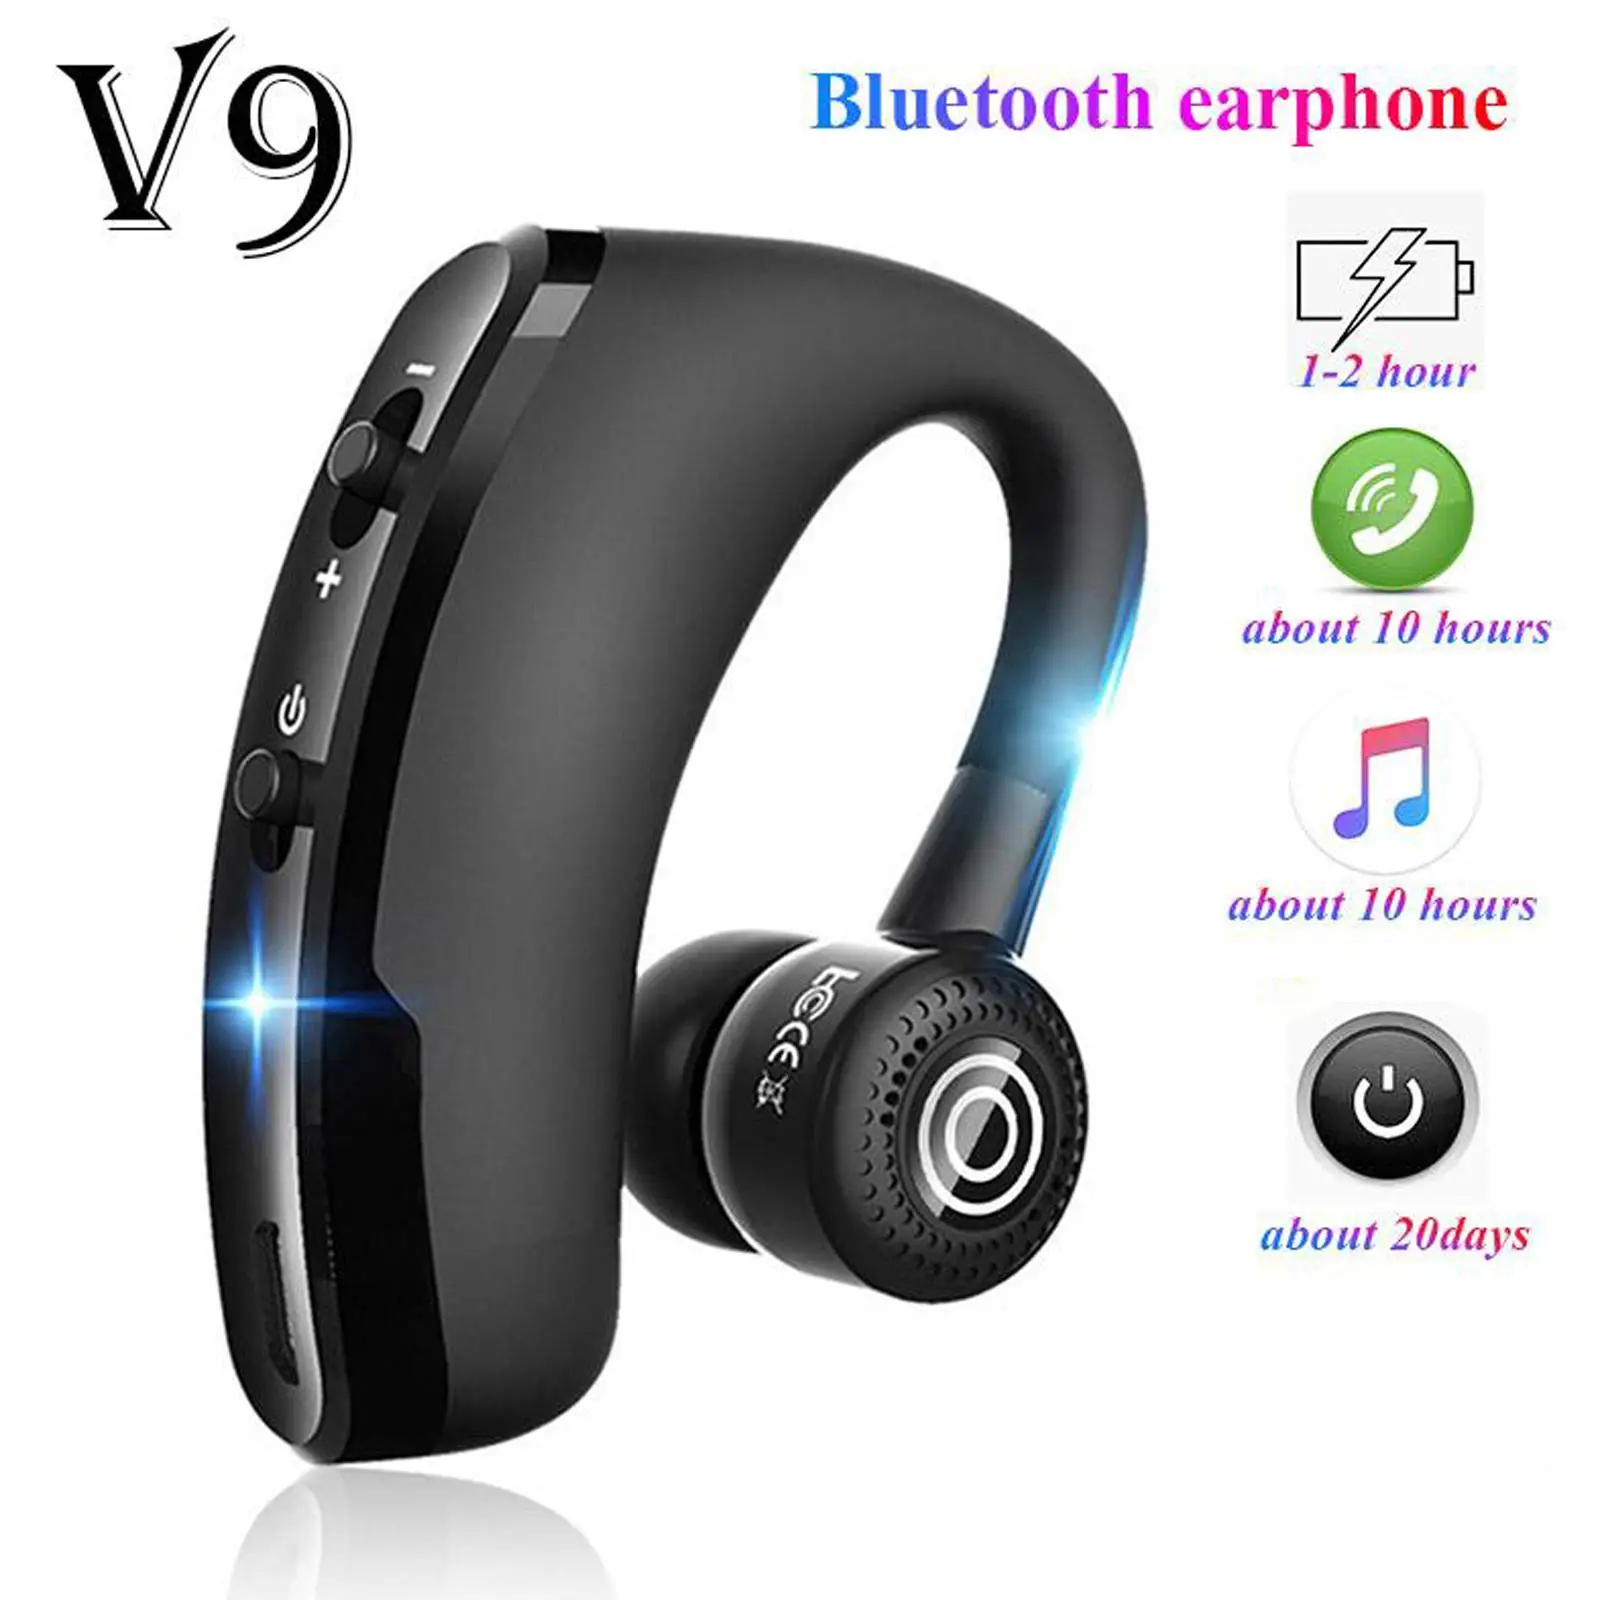 Earpiece V 4.0 Handsfree Headset 10 Hrs Driving Headset rs Standby Time for Android Laptop Trucker Driver V9